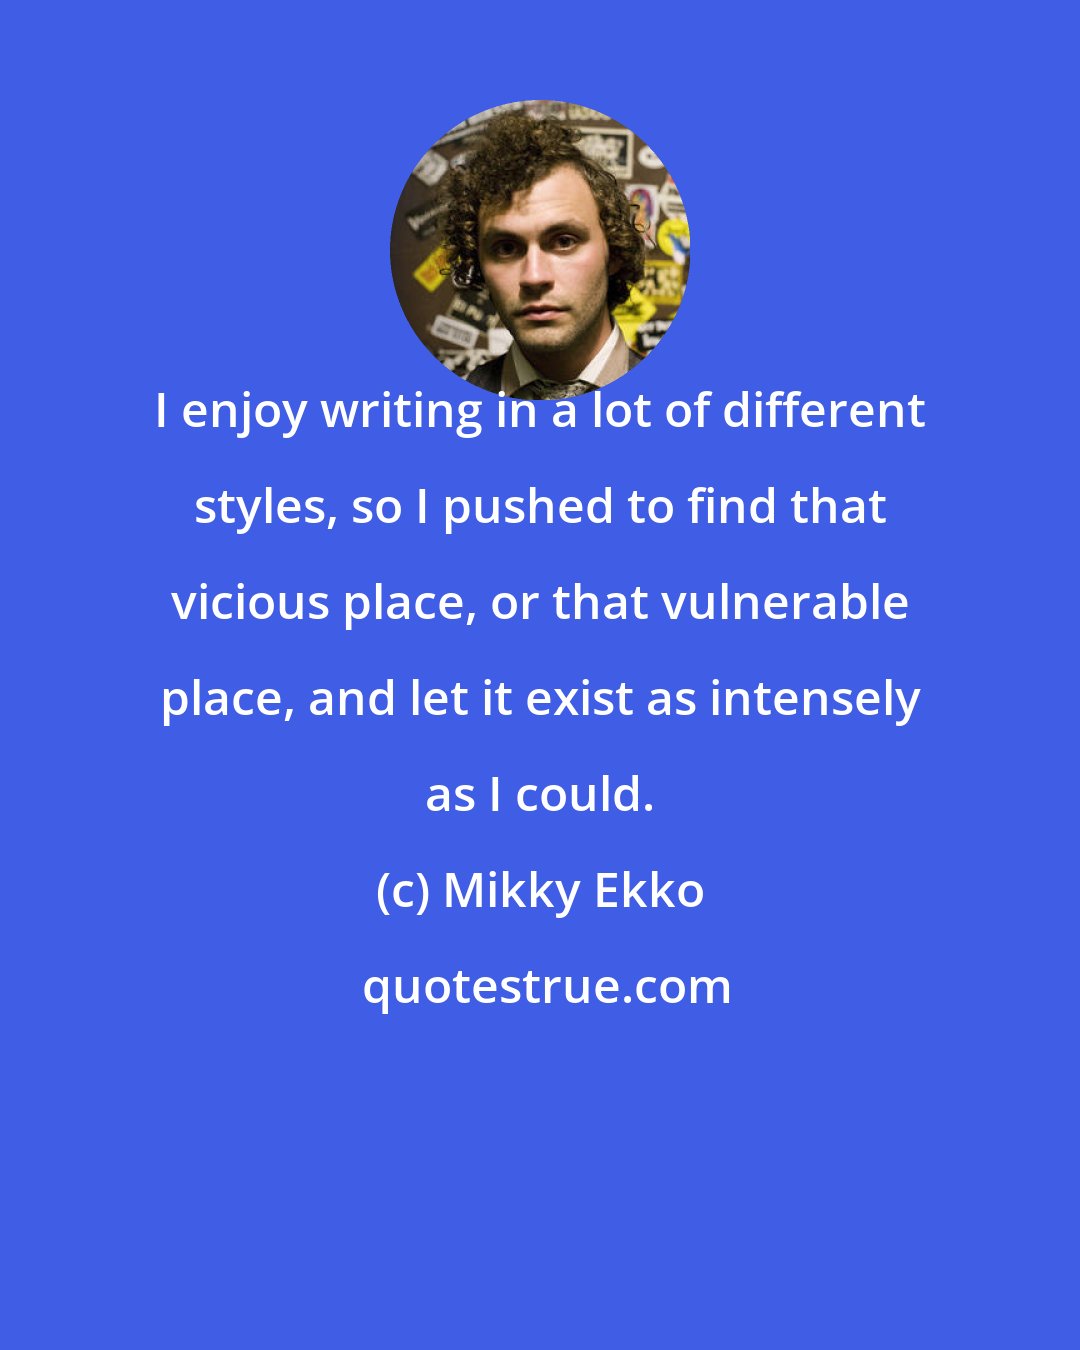 Mikky Ekko: I enjoy writing in a lot of different styles, so I pushed to find that vicious place, or that vulnerable place, and let it exist as intensely as I could.